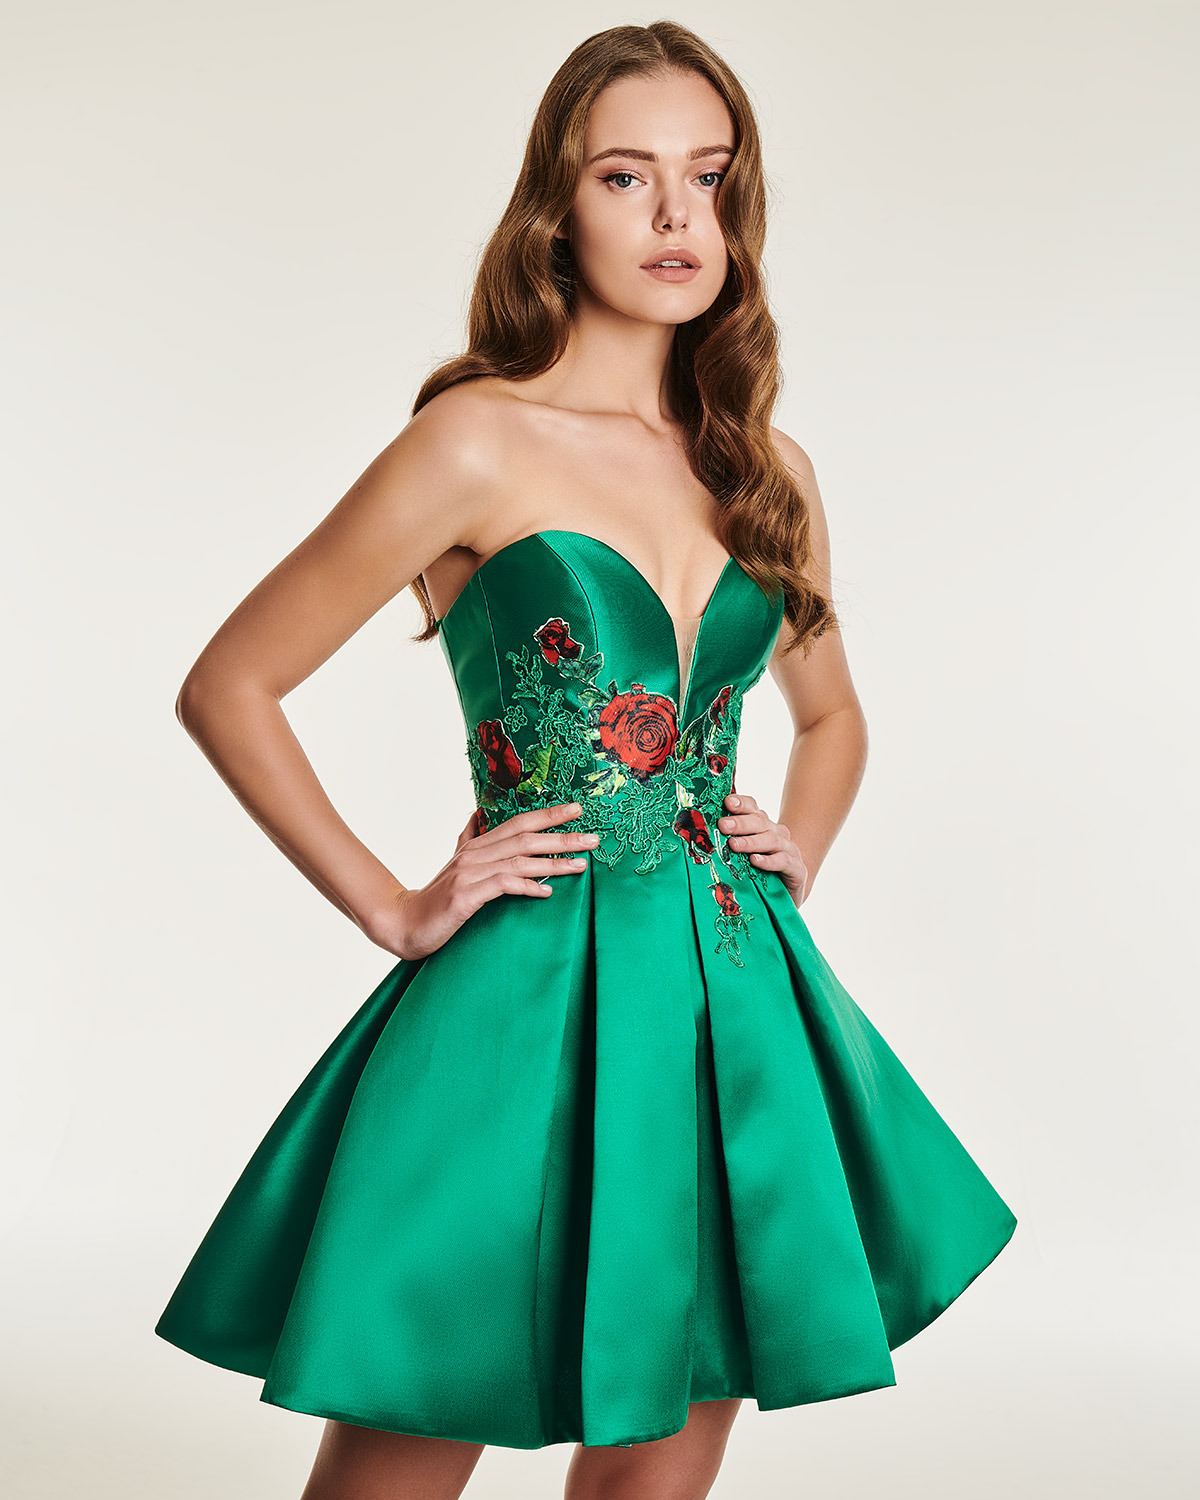 Cocktail Dresses / Short cocktail dress with flowers and lace